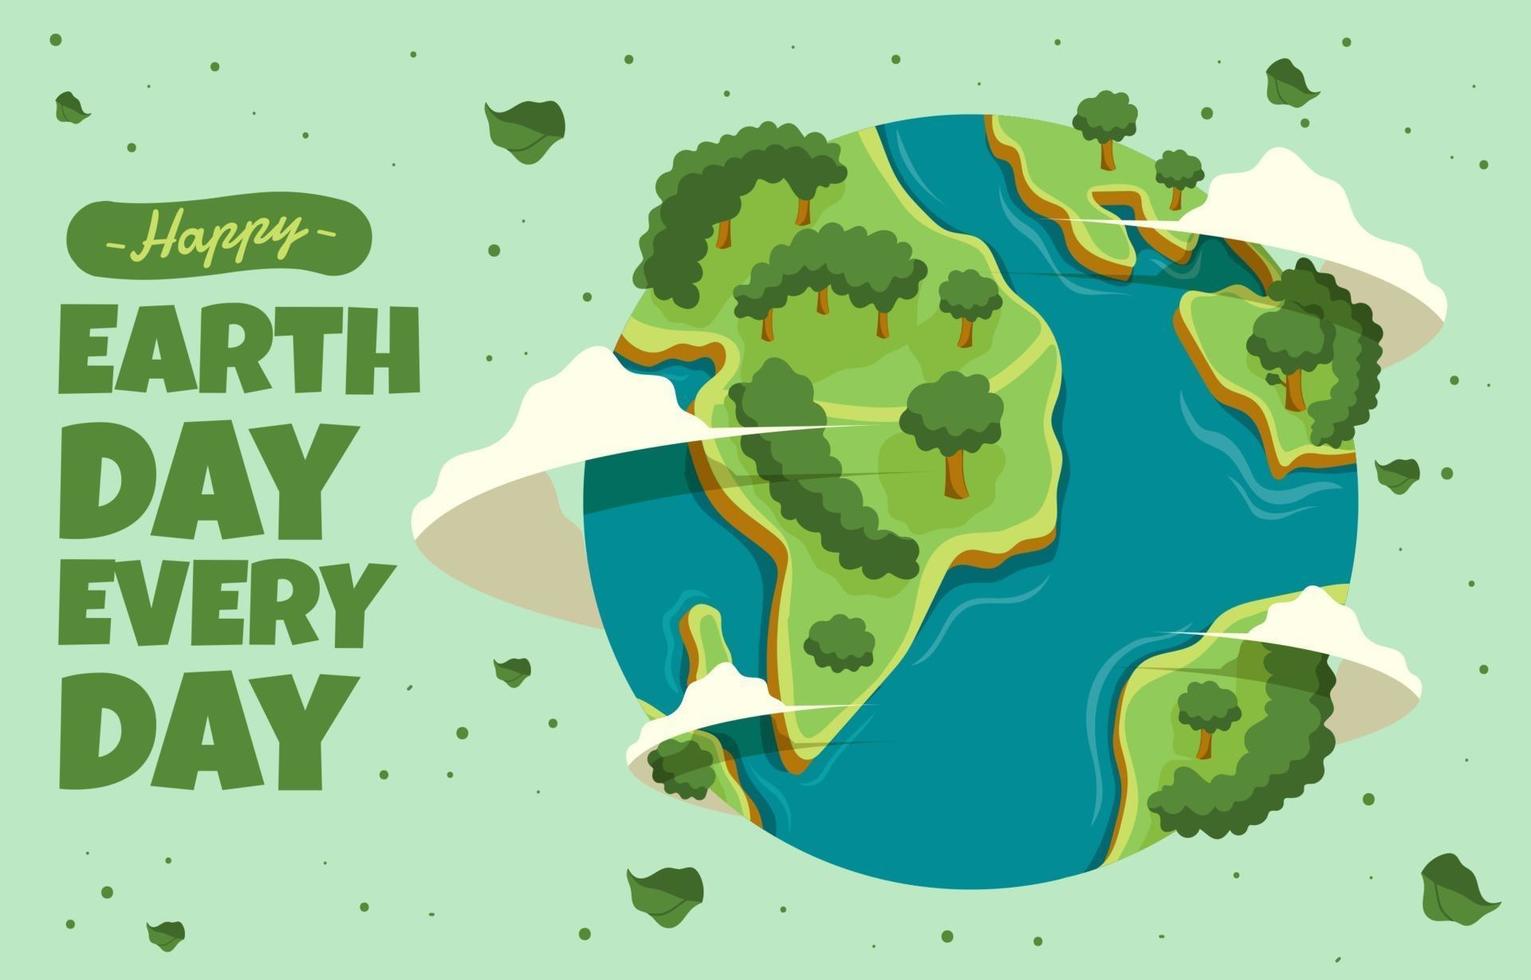 Earth Day Everyday Illustration vector